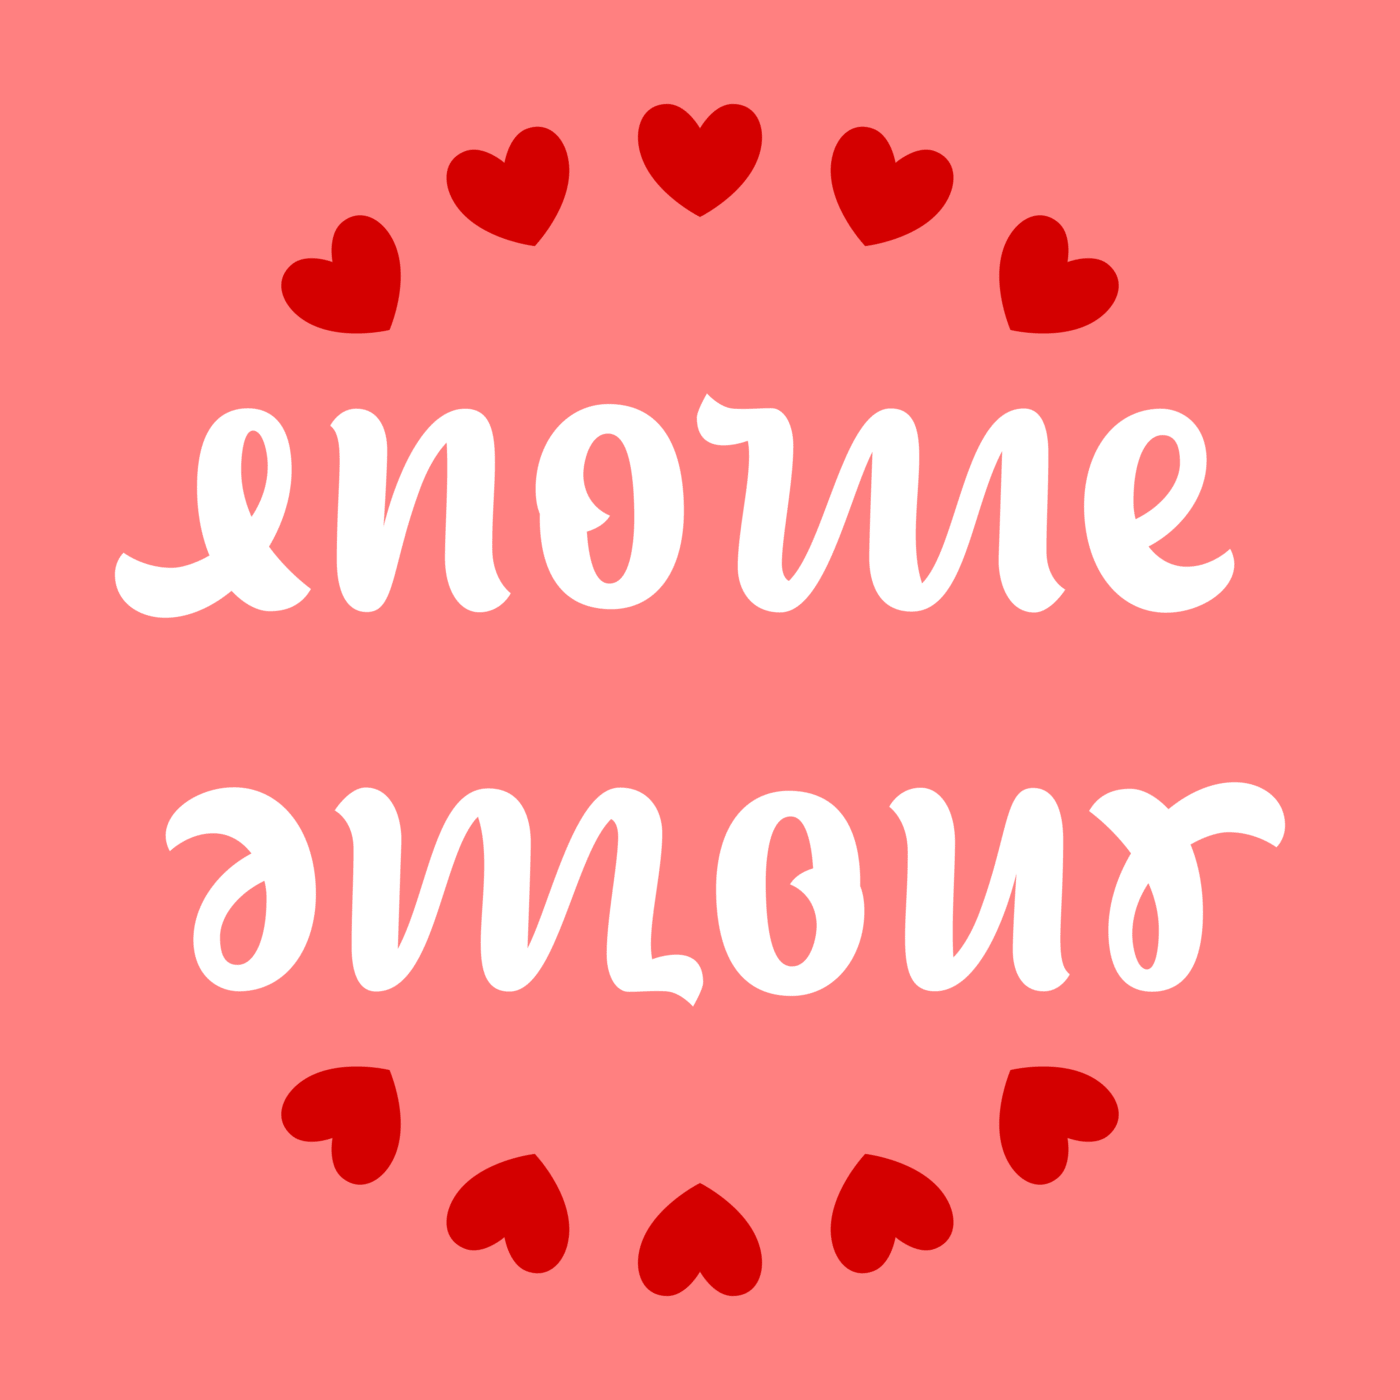 ambigramme enorme amour rouge